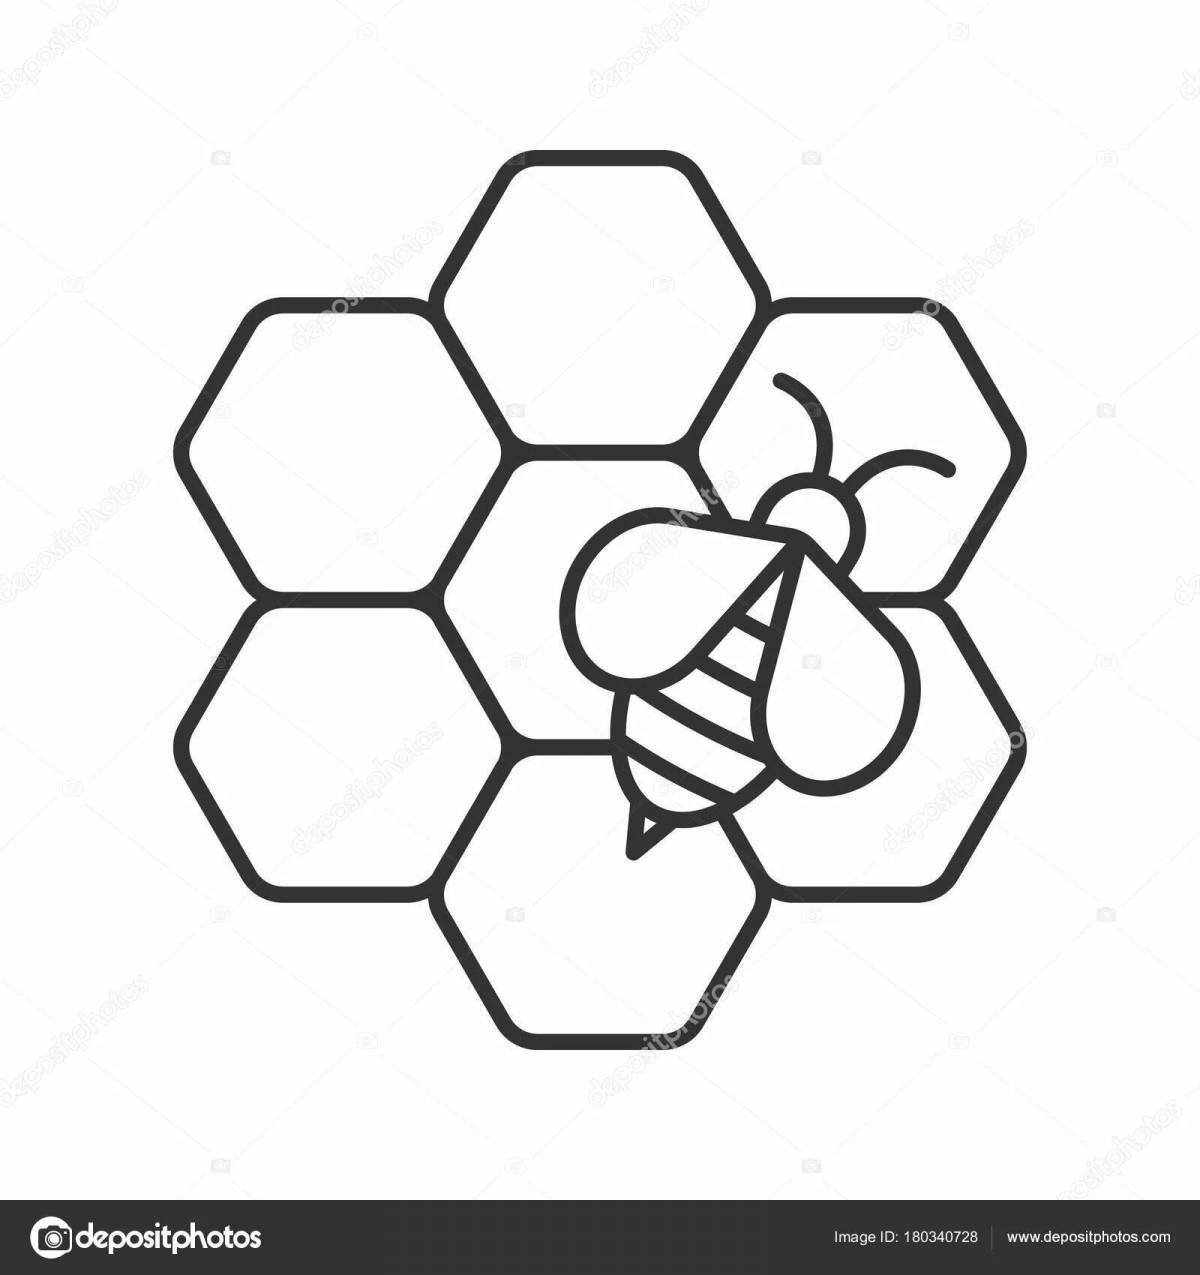 Exquisite honeycomb coloring book for beginners